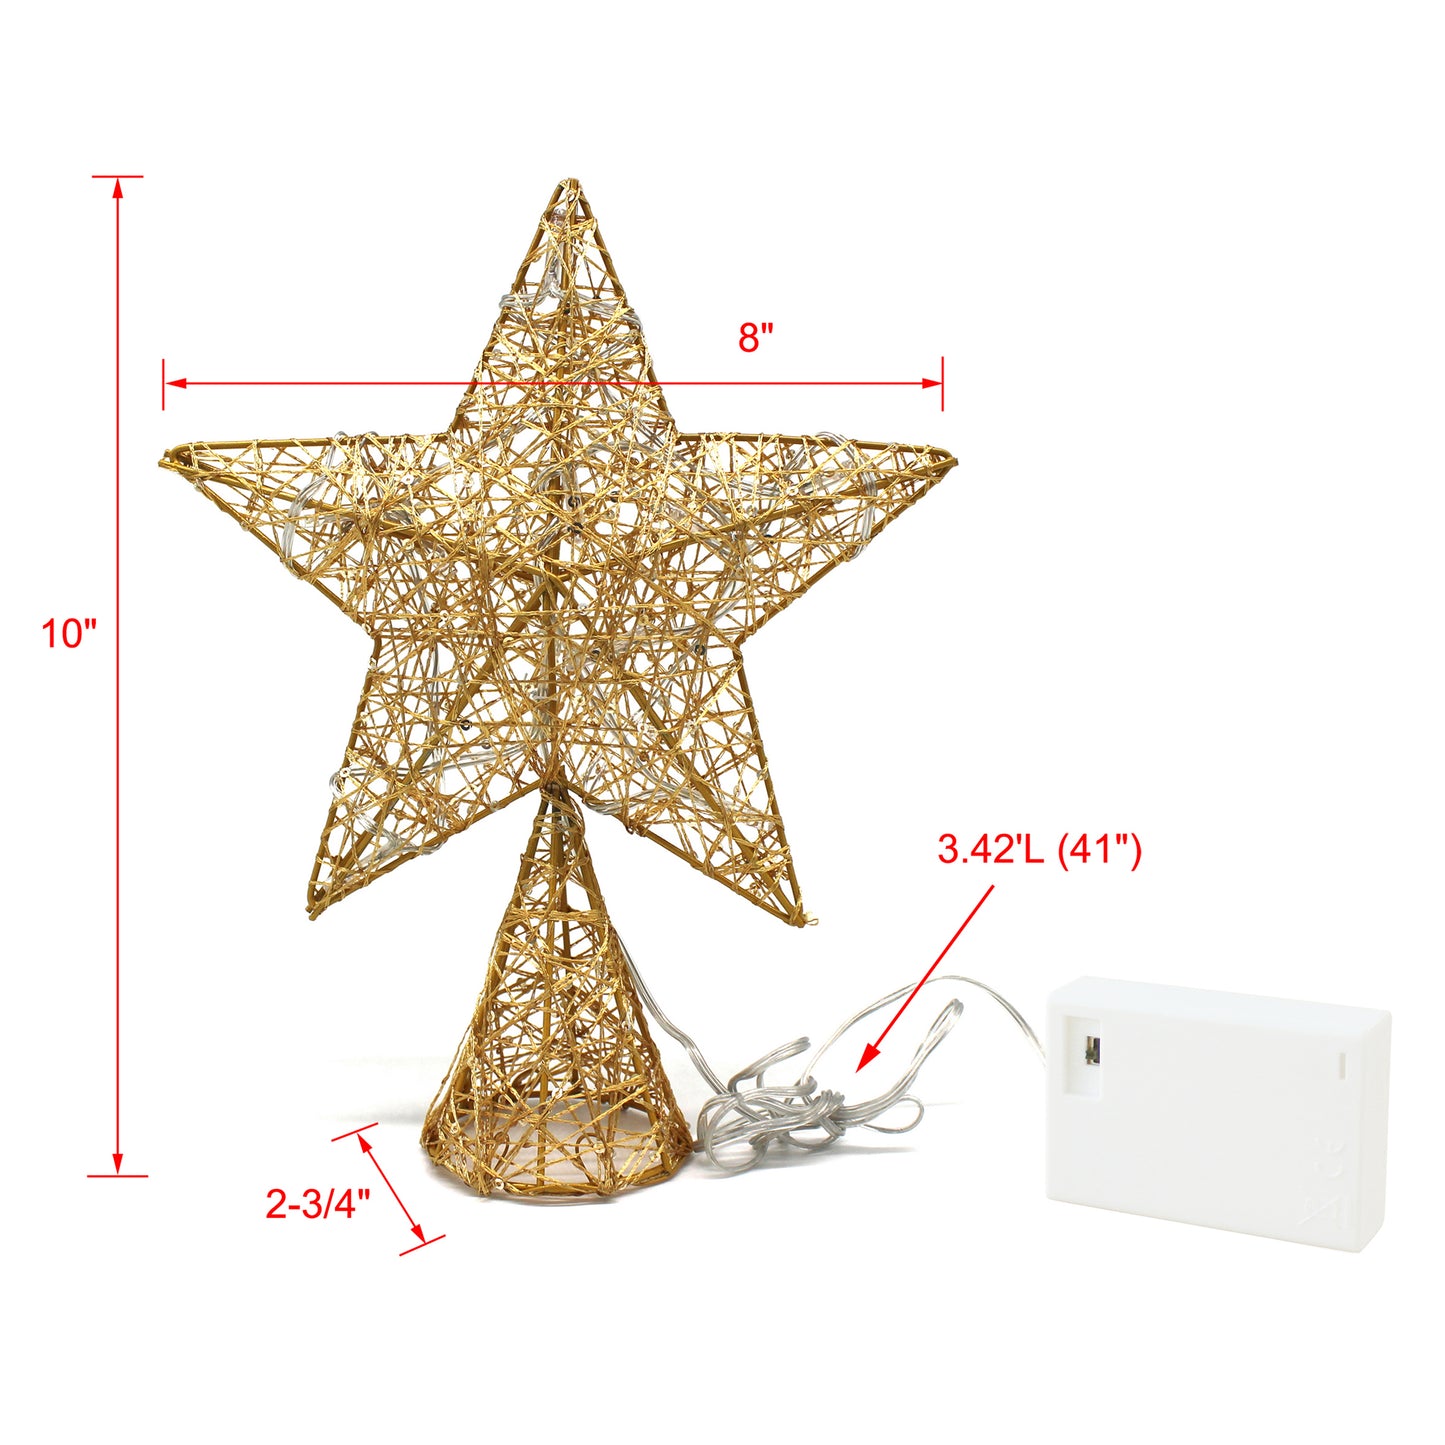 CVHOMEDECO. Gold Tree Top Star with Warm White LED Lights and Timer for Christmas Tree Decoration and Holiday Seasonal Décor, 8 x 10 Inch